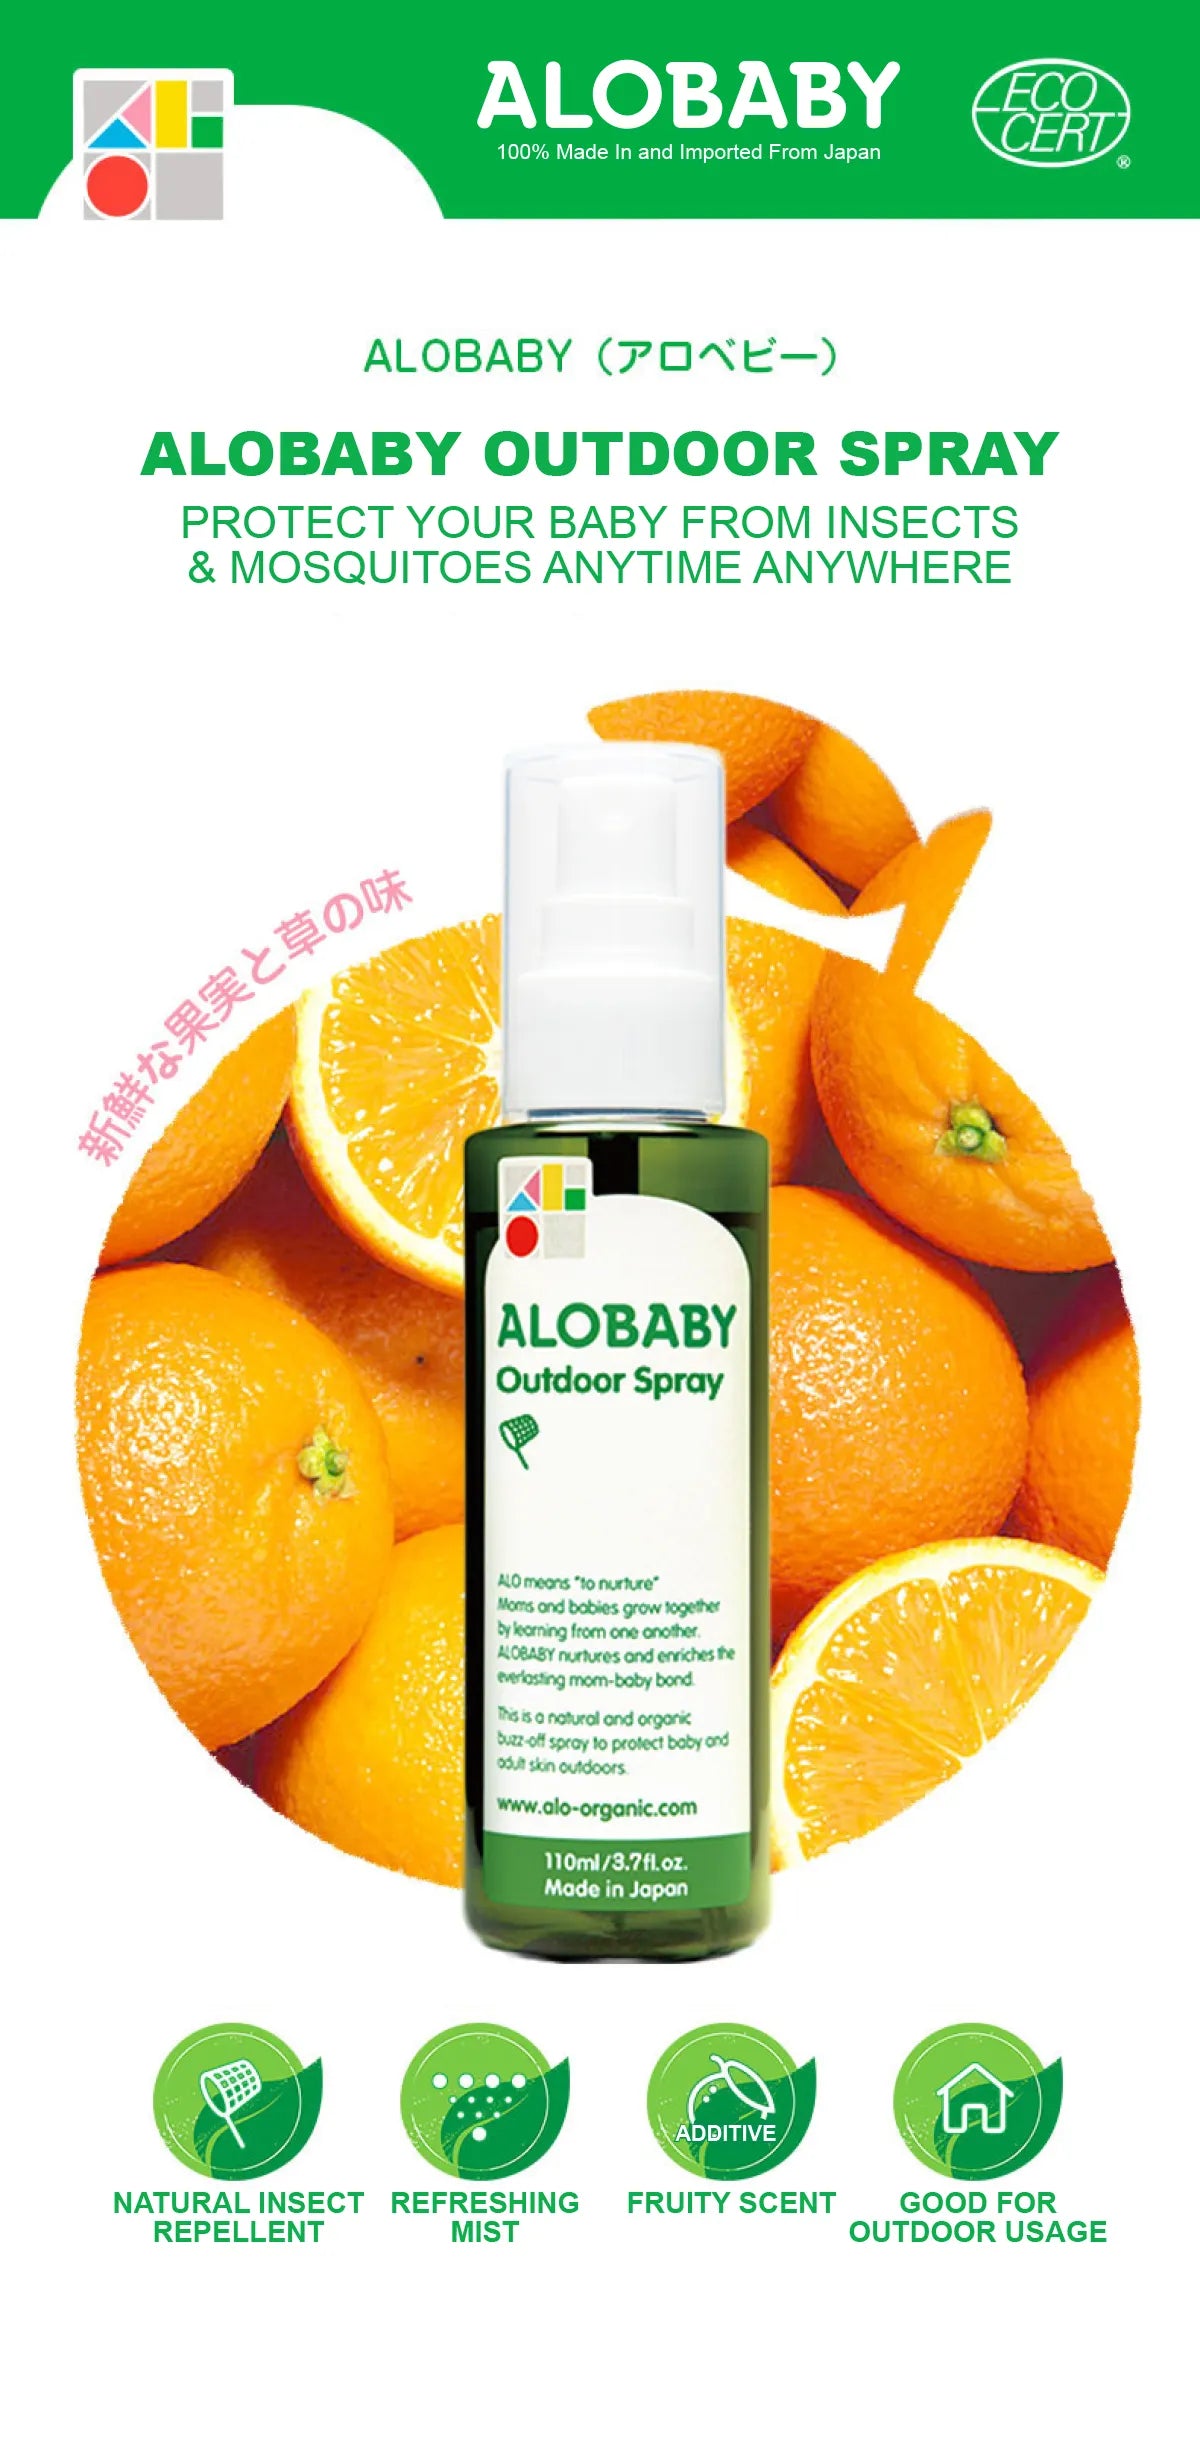 Made-in-Japan organic Outdoor Spray repels insects with natural derived aroma.<br data-mce-fragment="1">It is made from Orange Fruit Water, Lemongrass Oil and Rosemary Oil. <br data-mce-fragment="1">Ideal DEET-free formula protects baby's skin gently.